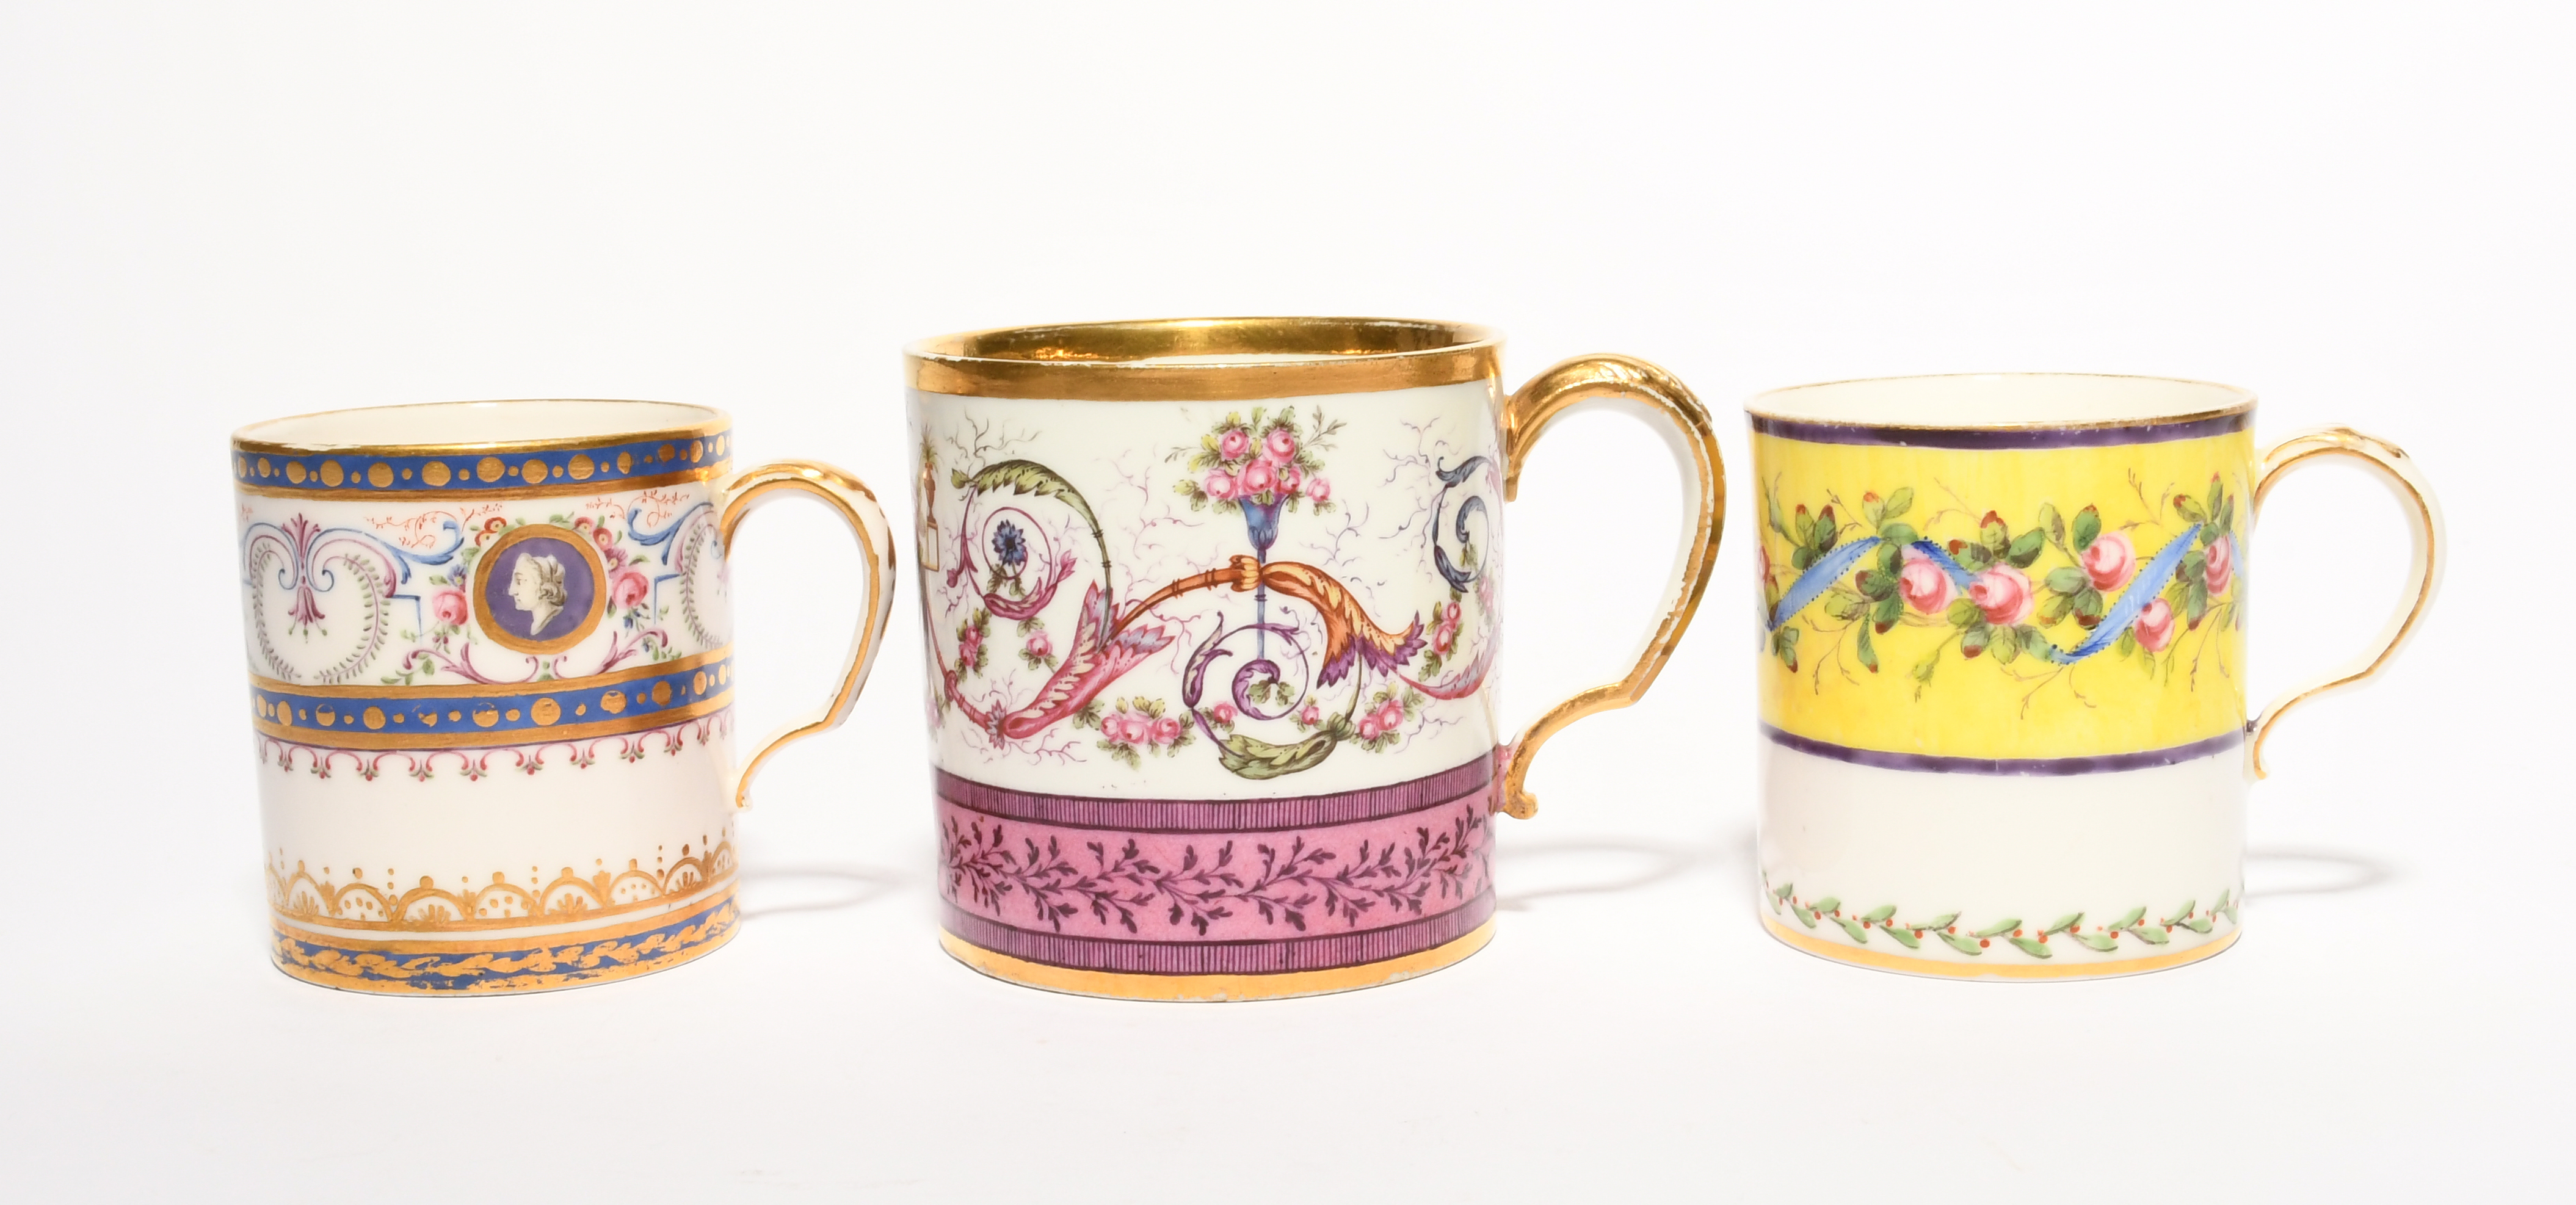 Three Sevres coffee cans (gobelets litron), c.1779-1800, the largest painted with pink roses - Image 2 of 4